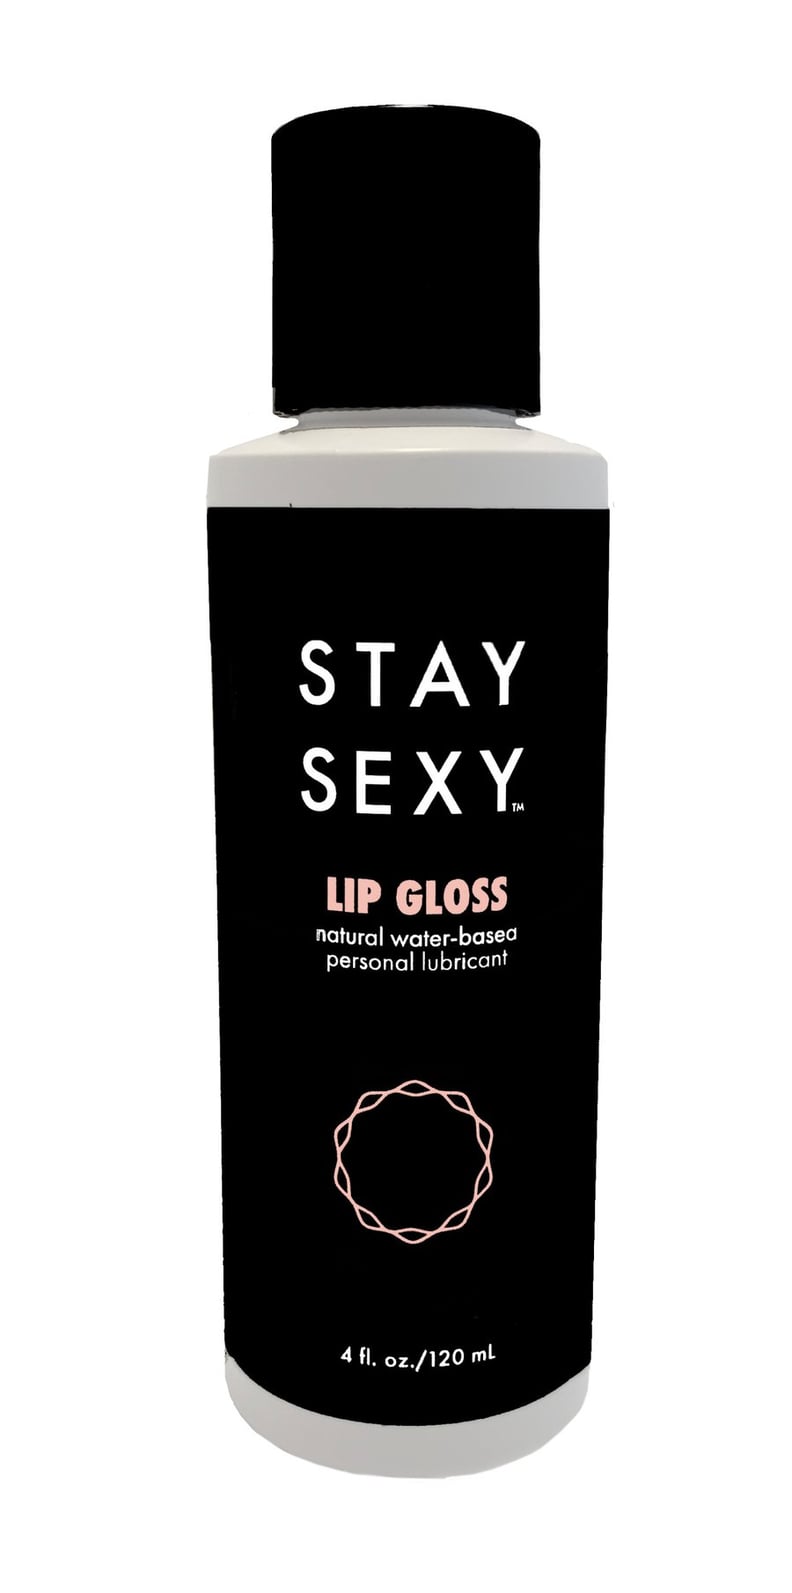 Stay Sexy's Lip Gloss Personal Lubricant